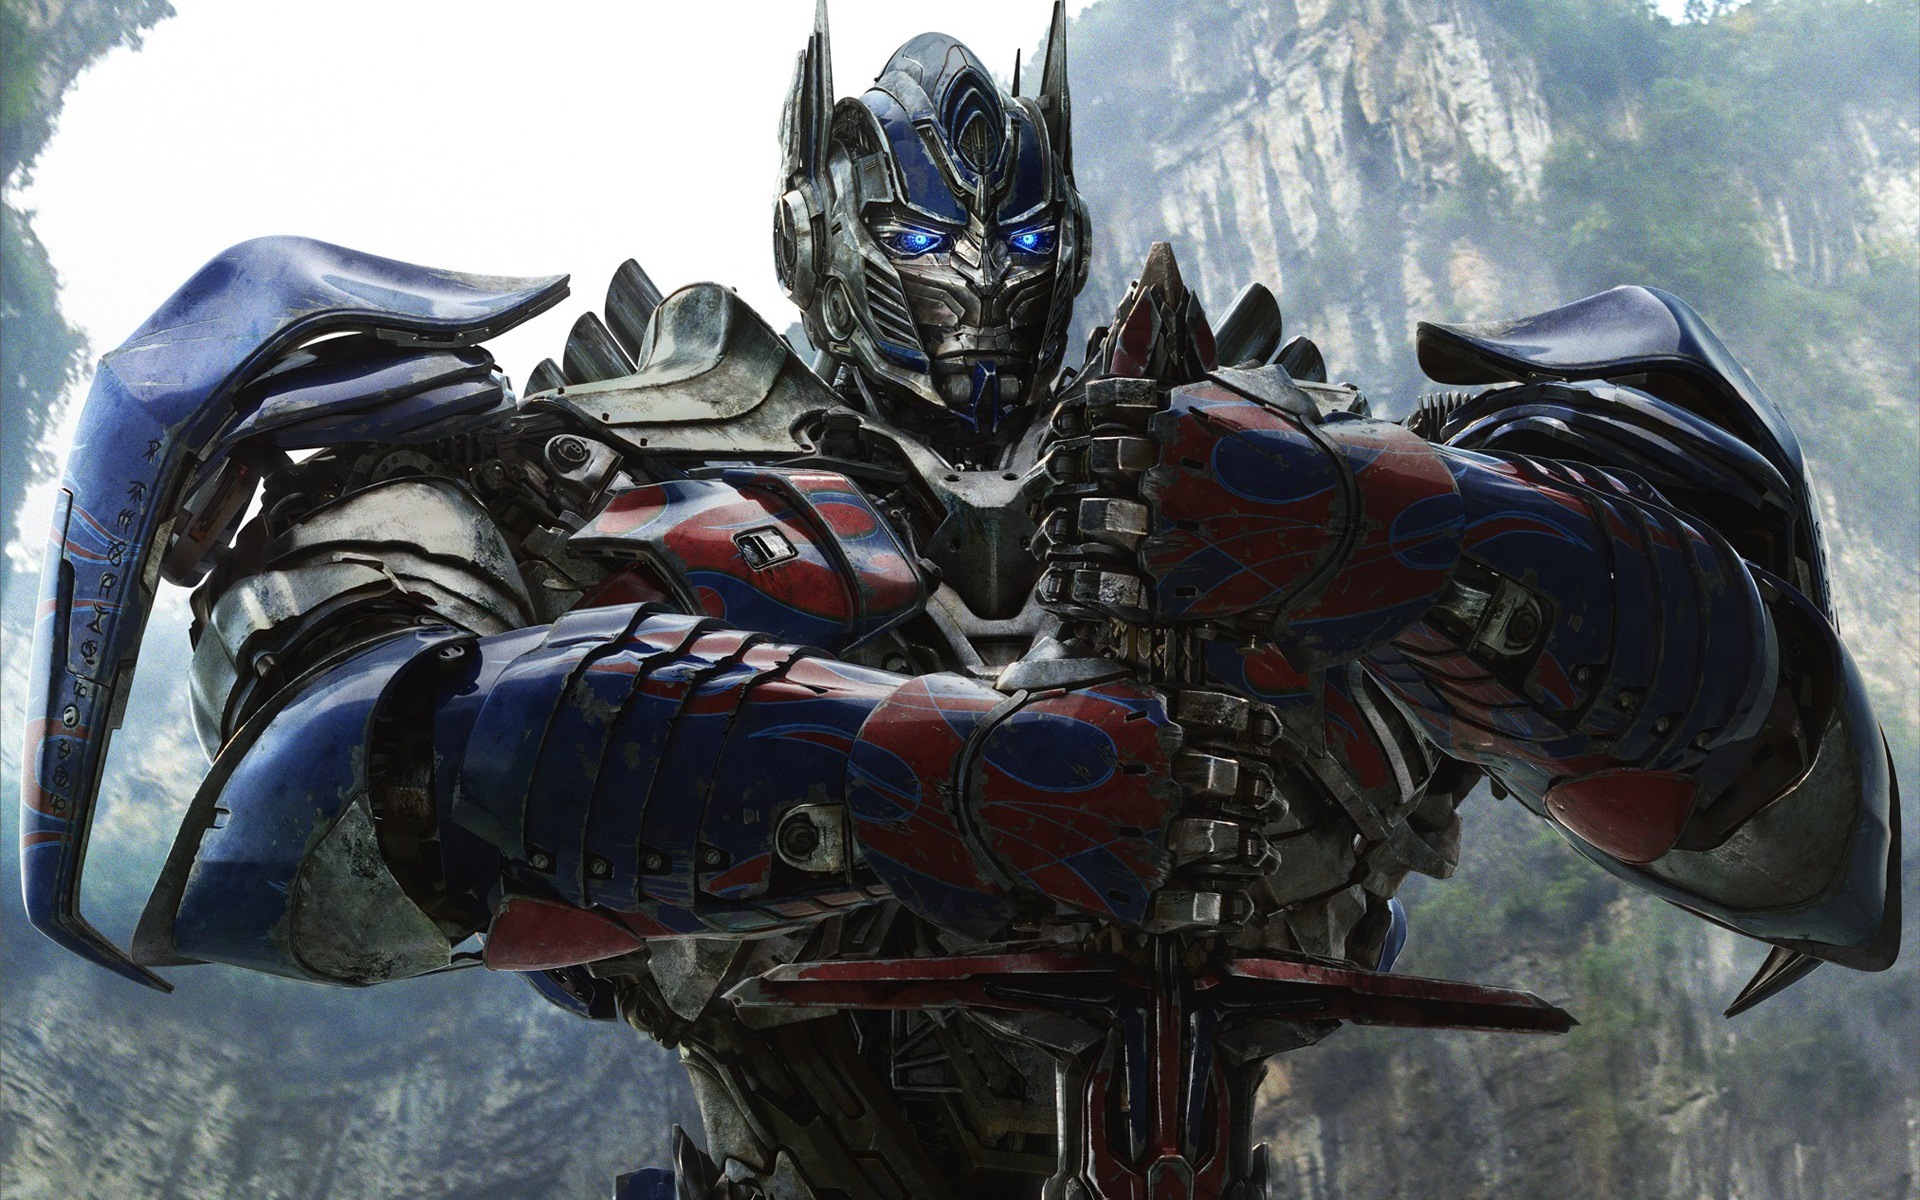 2014 Transformers: Age of Extinction HD wallpapers #10 - 1920x1200